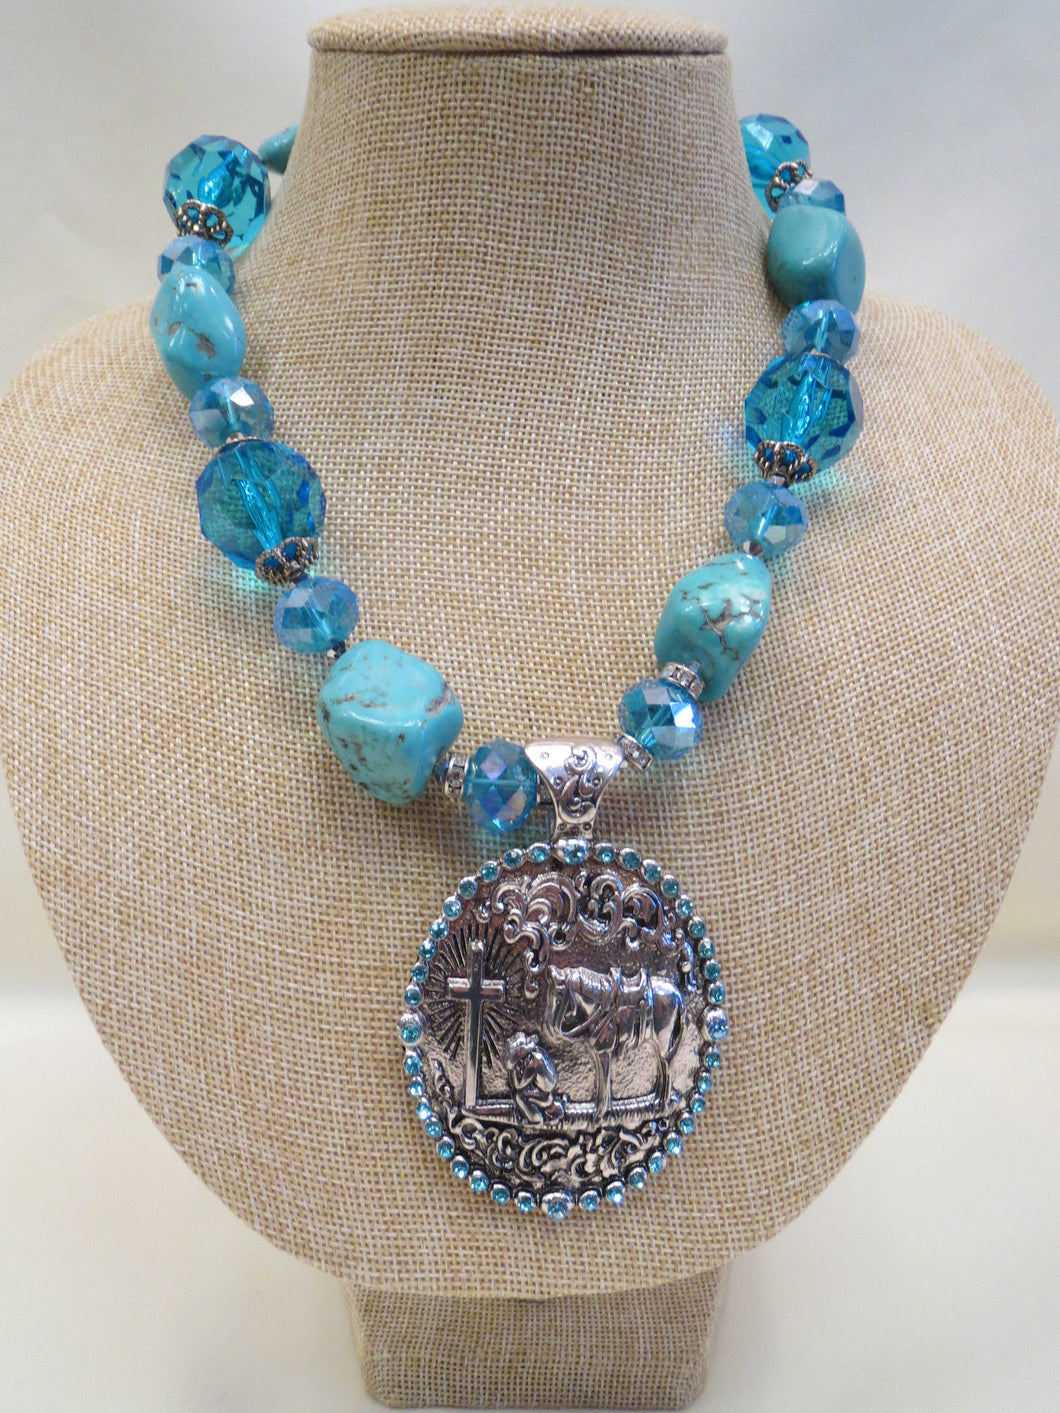 Turquoise Beaded Necklace w/Cowboy Cross Necklace | All Dec'd Out